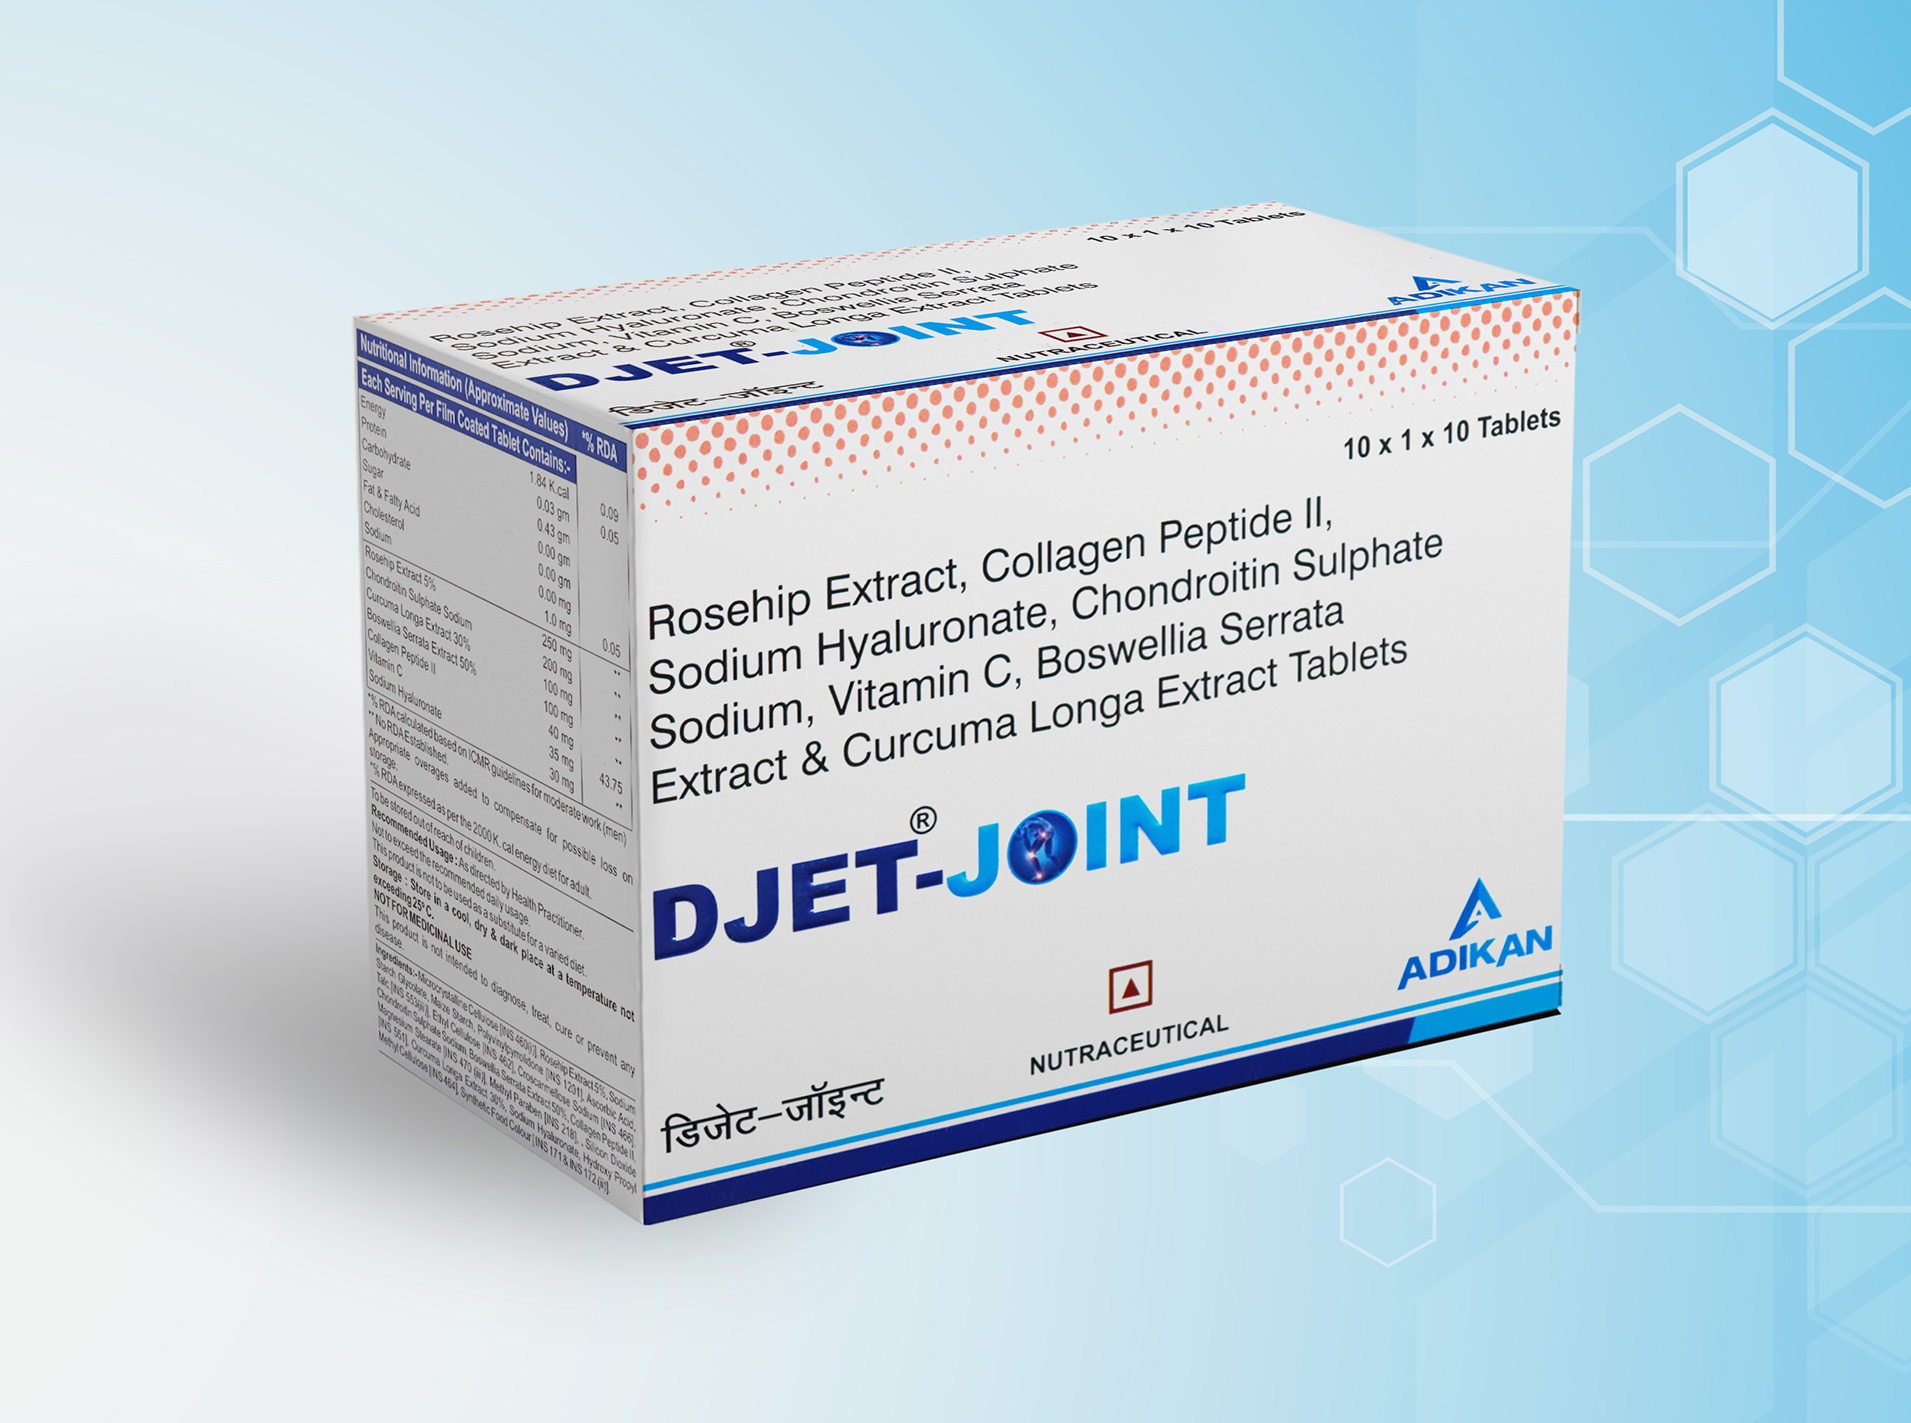 DJET-JOINT